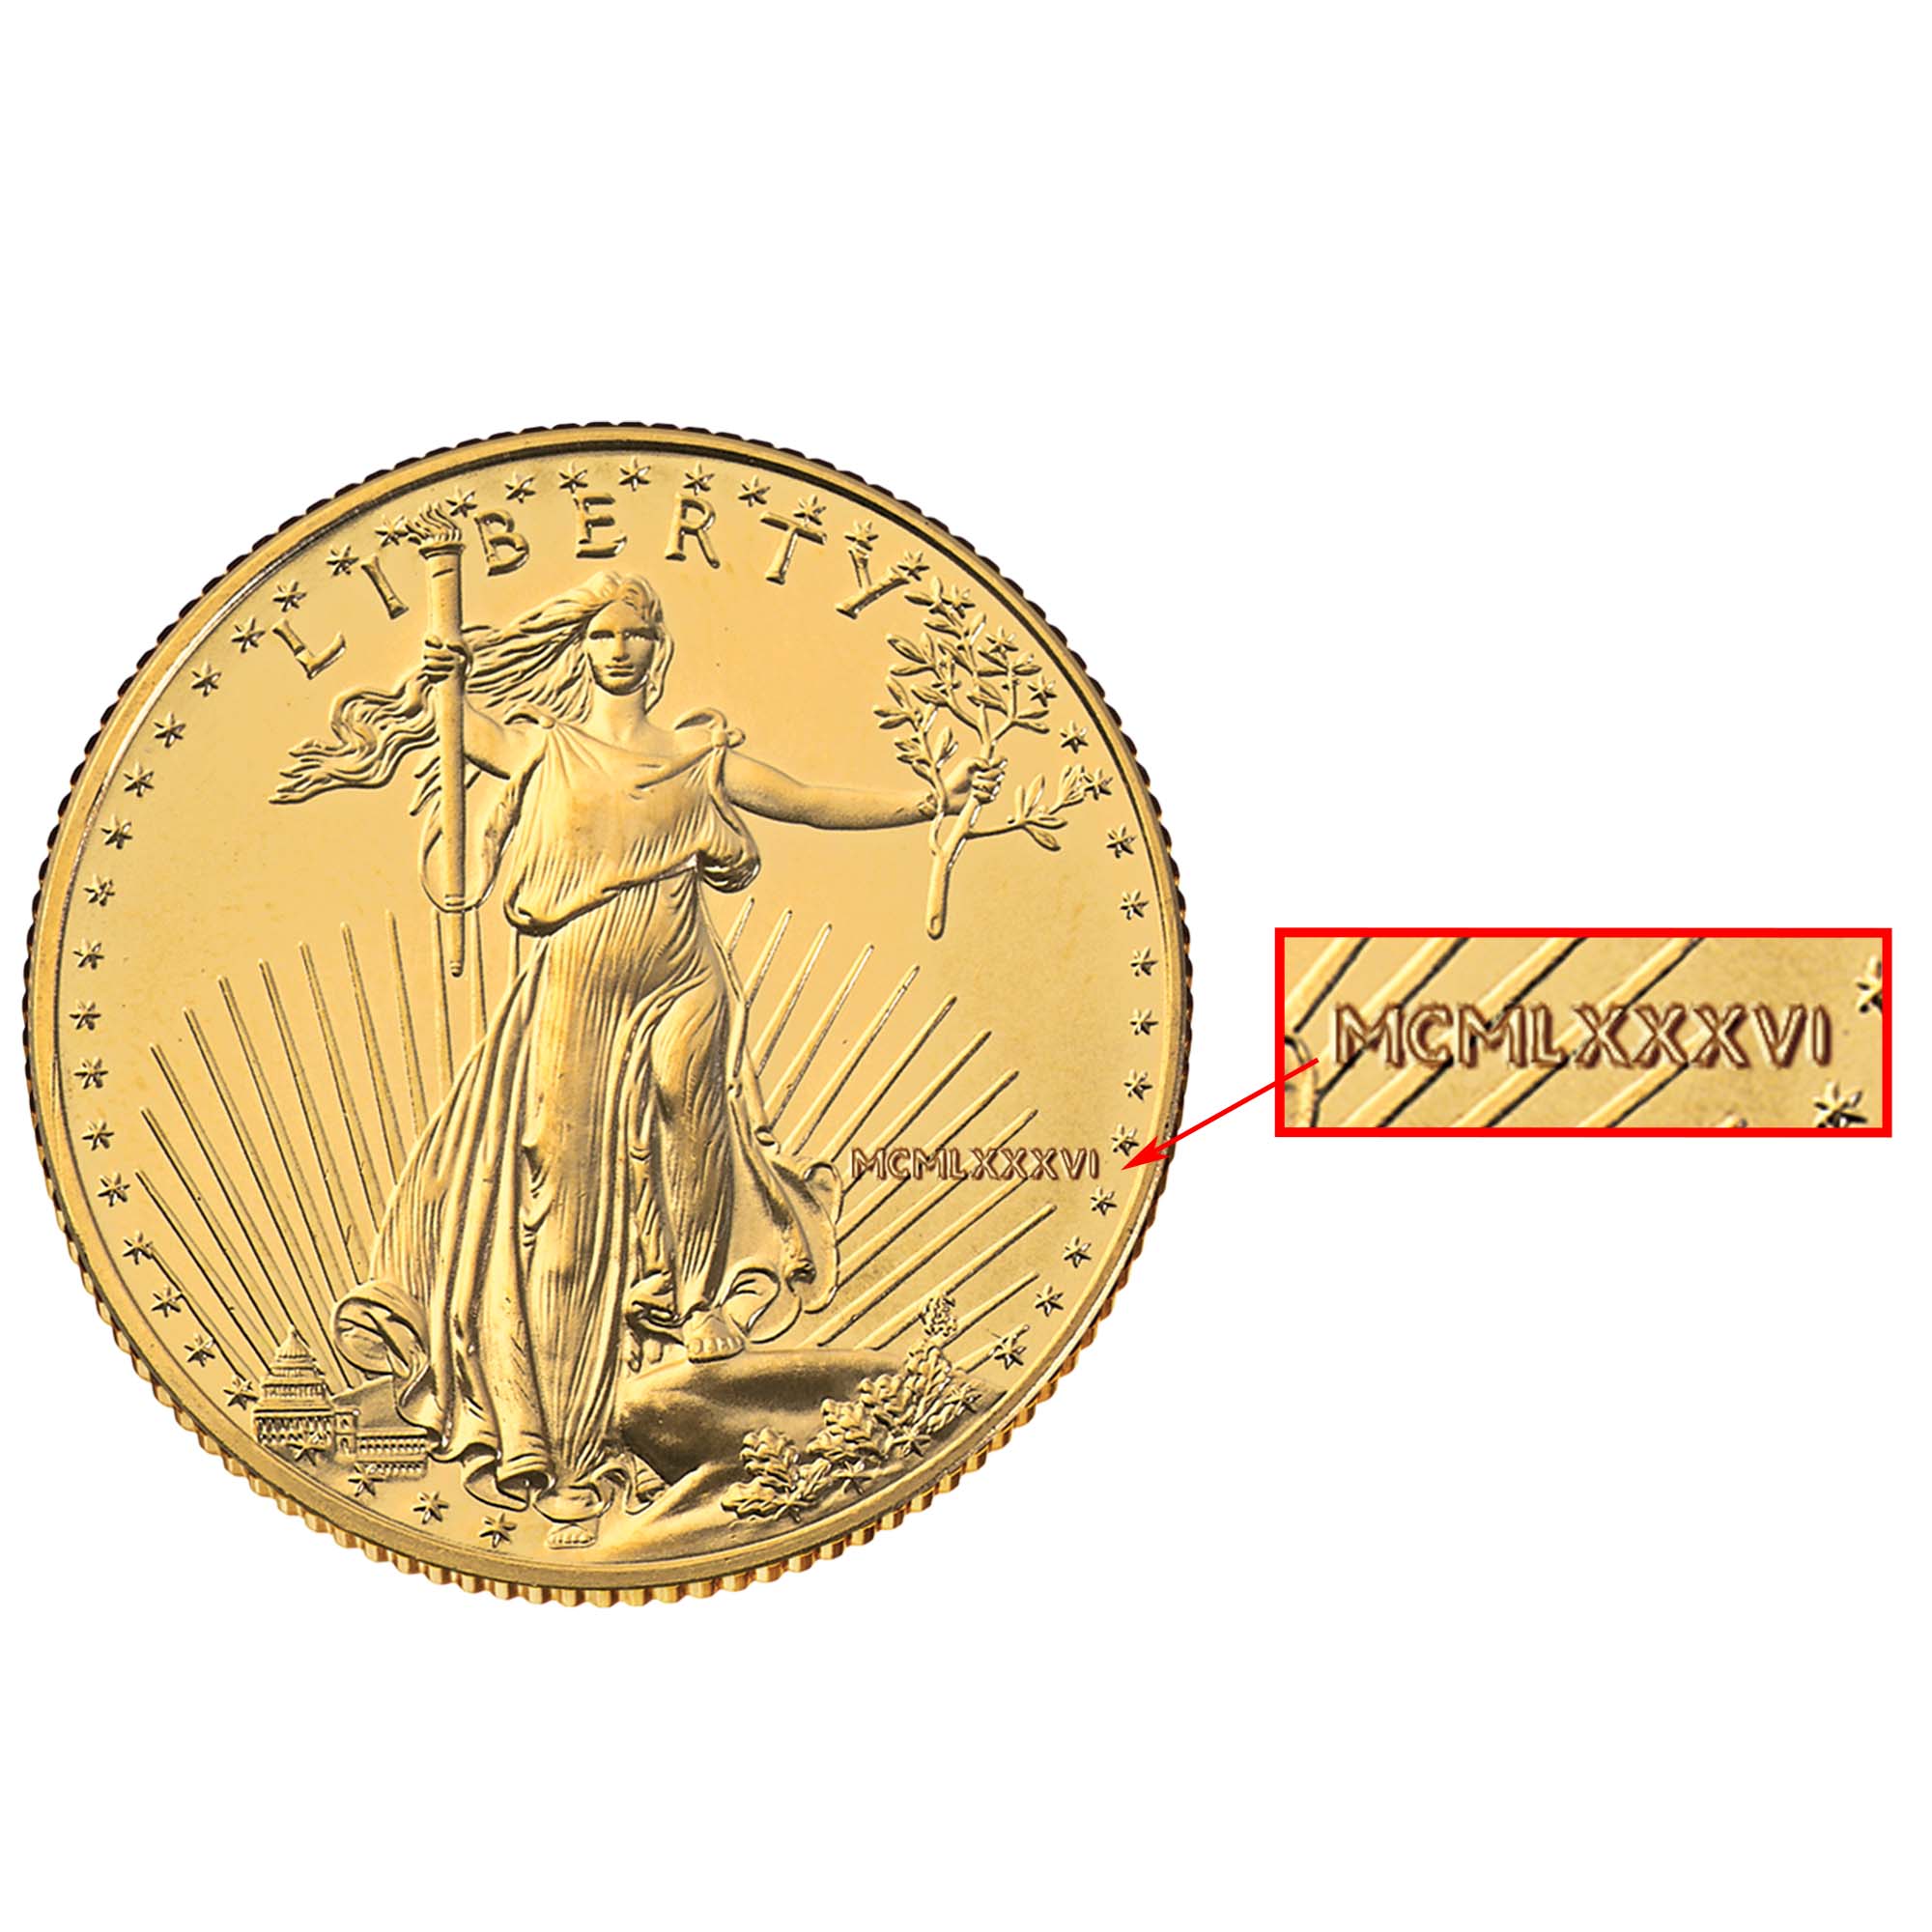 The Uncirculated First-Year American Eagle Gold Coin Collection